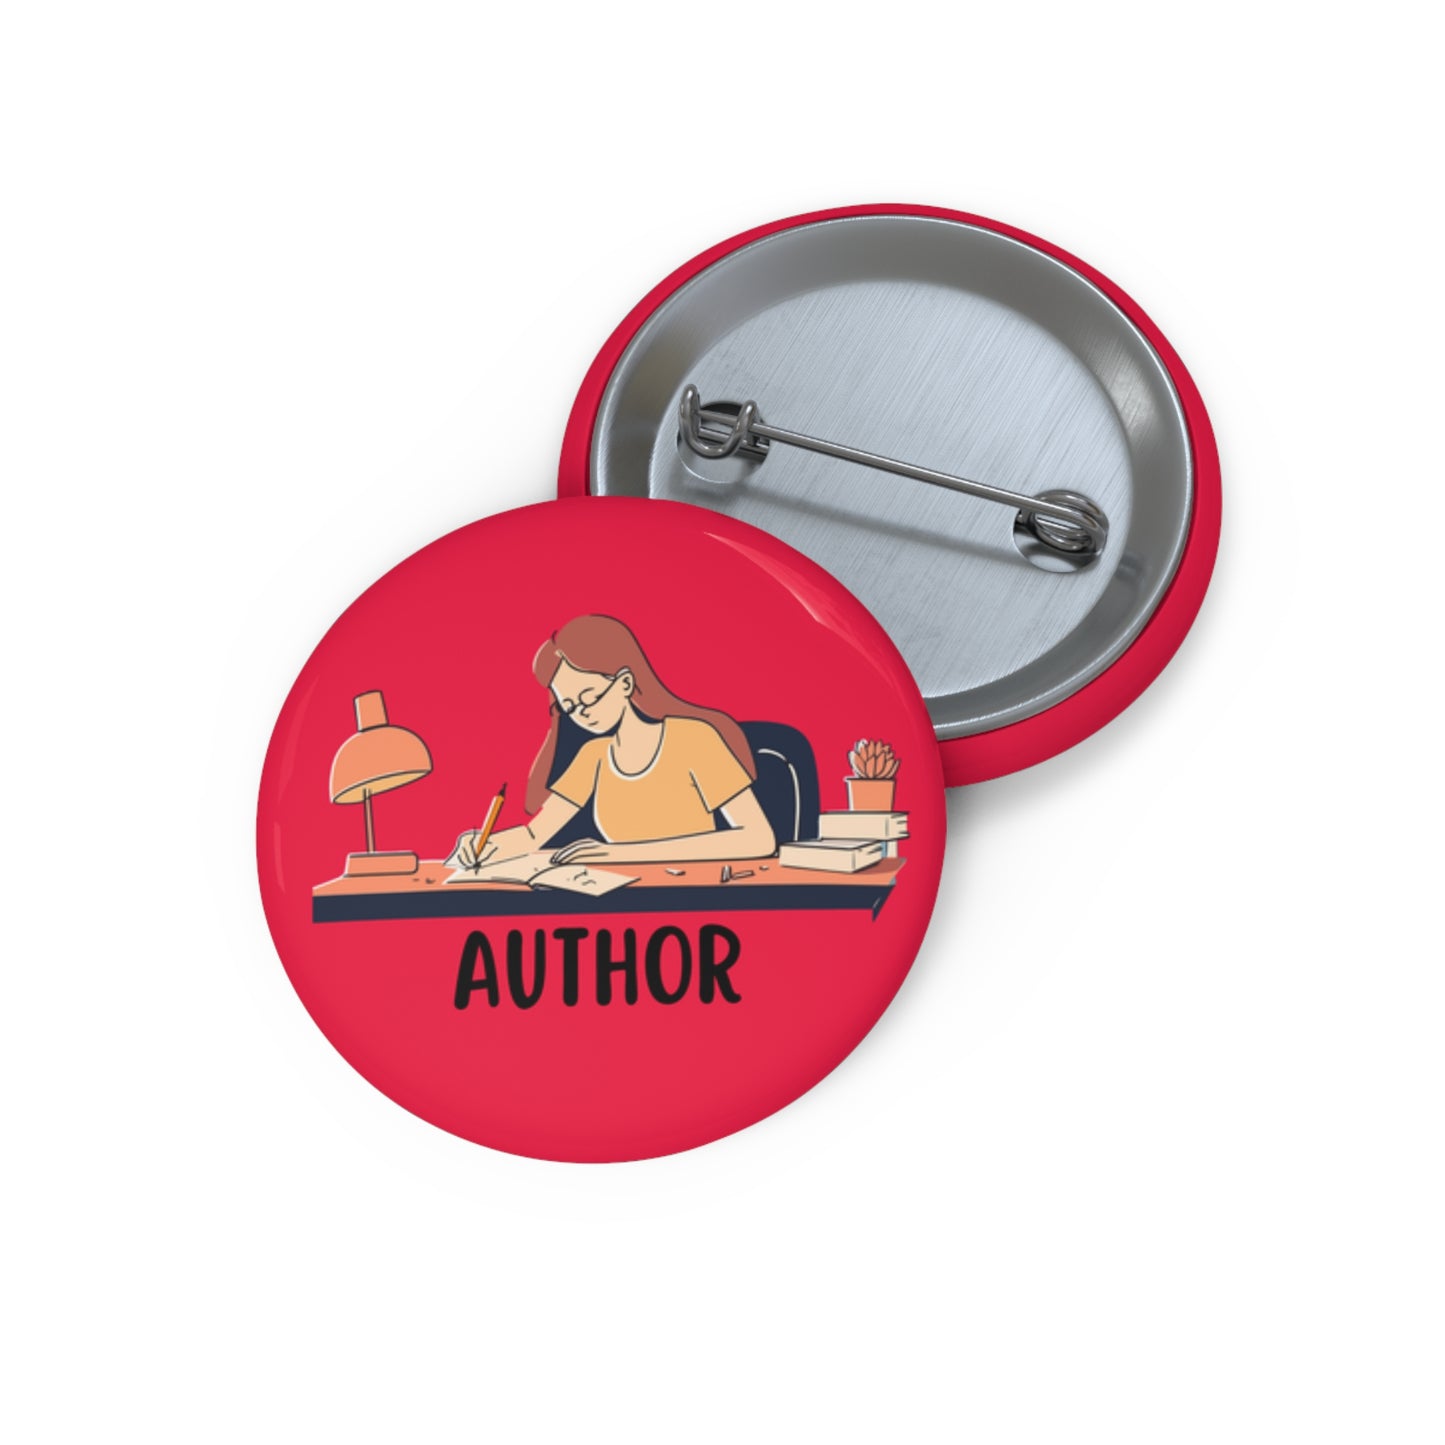 Author Pin, Author Pinback Button, Author Gifts, Writer Pin, Writer Pinback Button, Writer Gift, Author of Books Gifts, Gifts Author Brooch